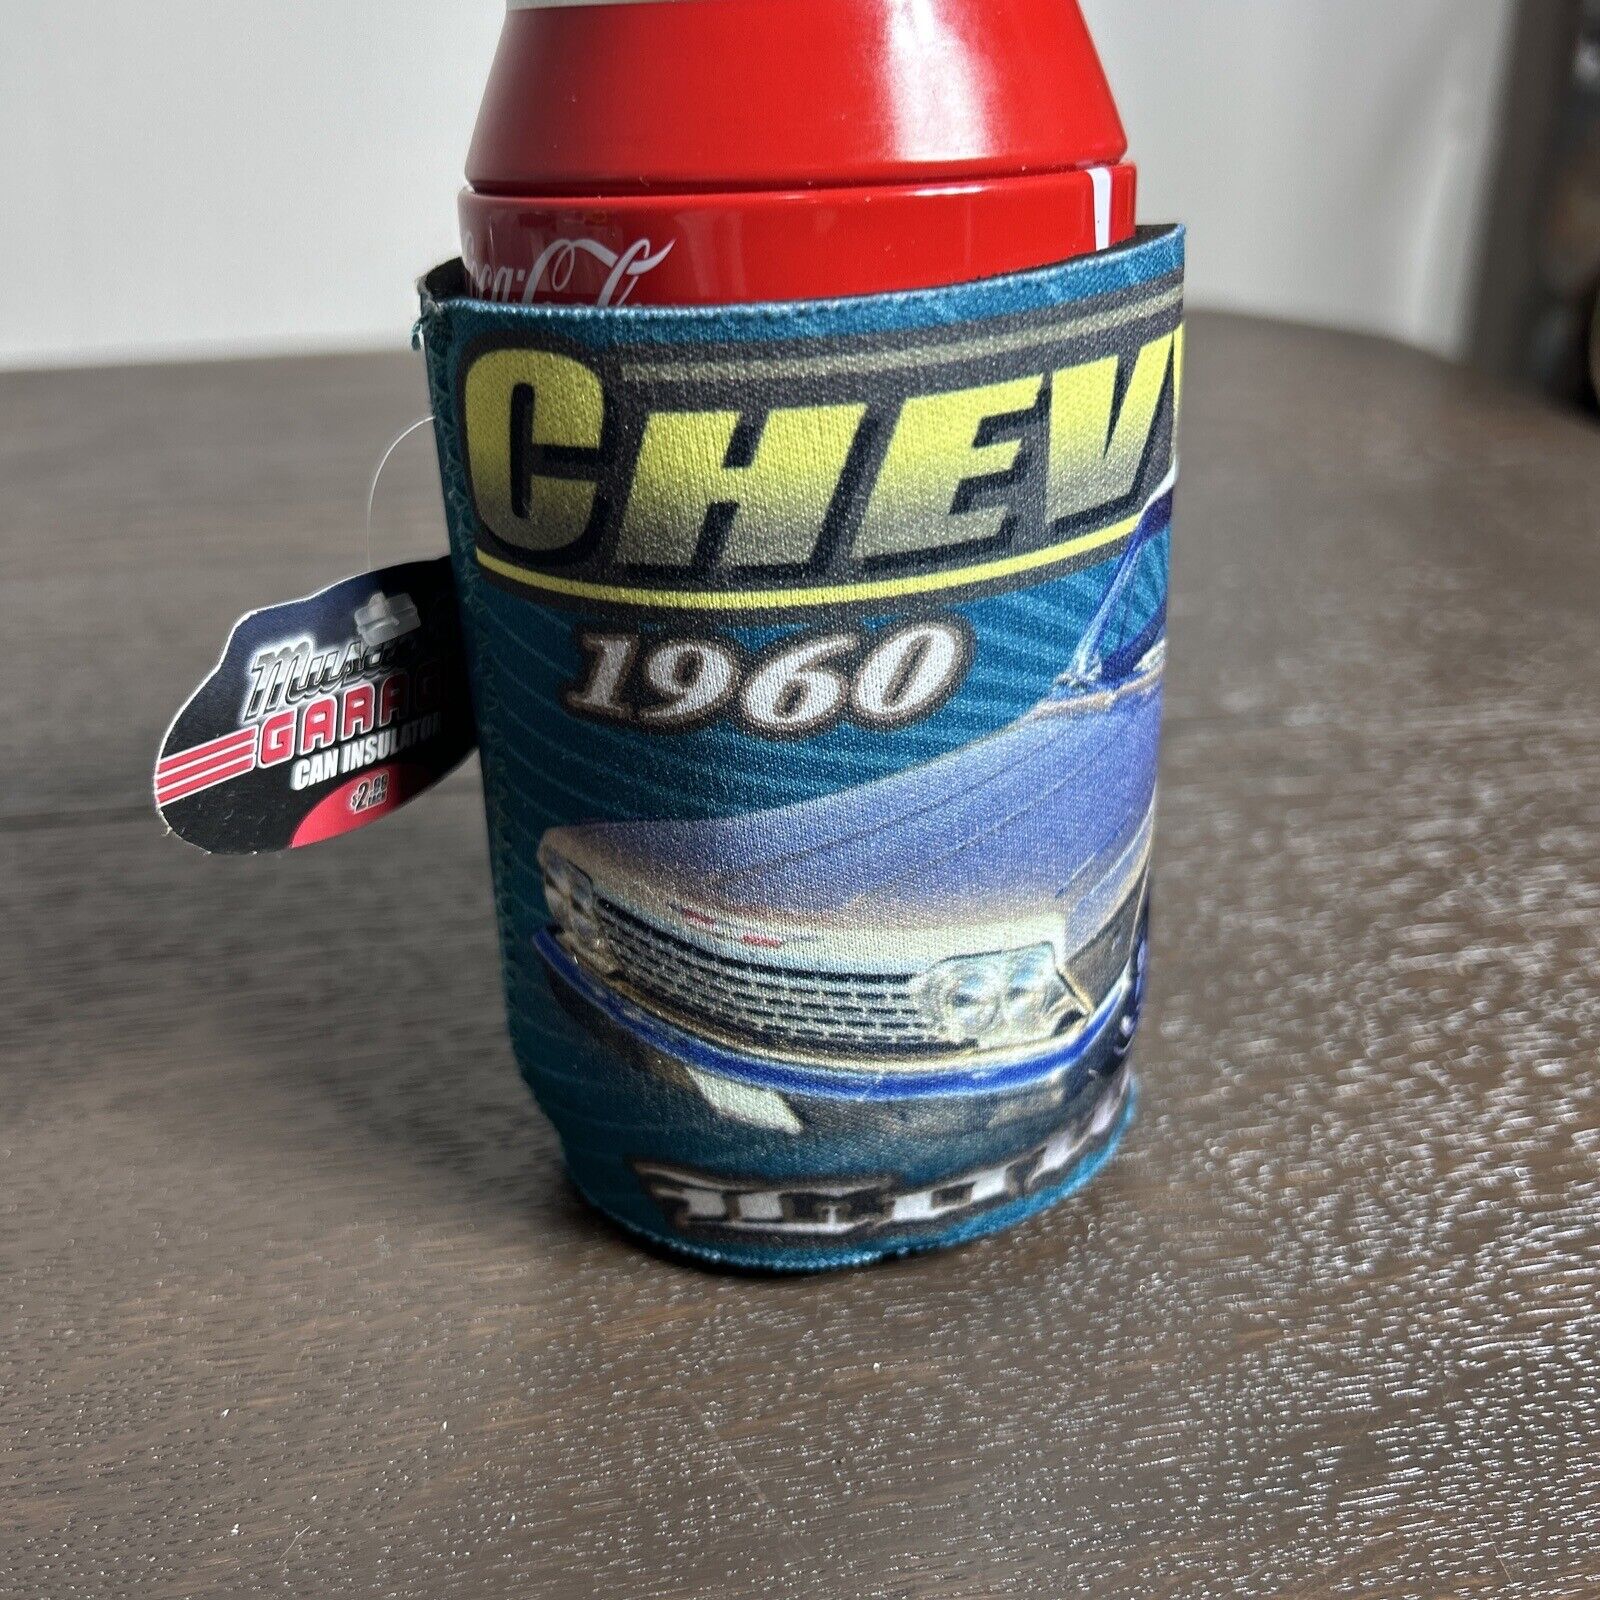 1 Piece - 1960 Chevy Impala Car Drink Koozie - Chevrolet Beer Soda Can Holders